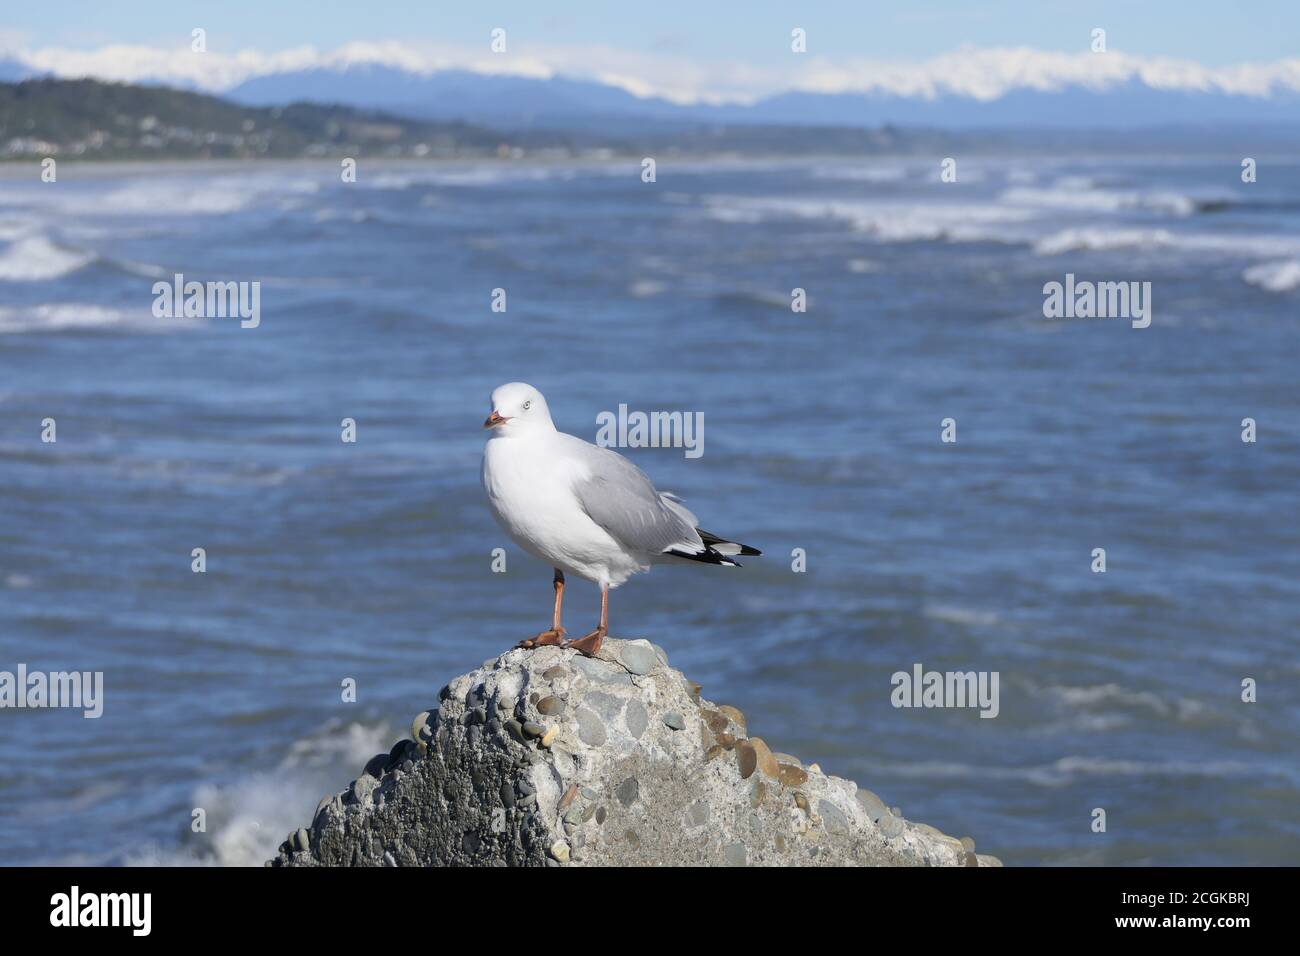 Seagull standing on a rock with the sea and snow covered mountains in the background Stock Photo